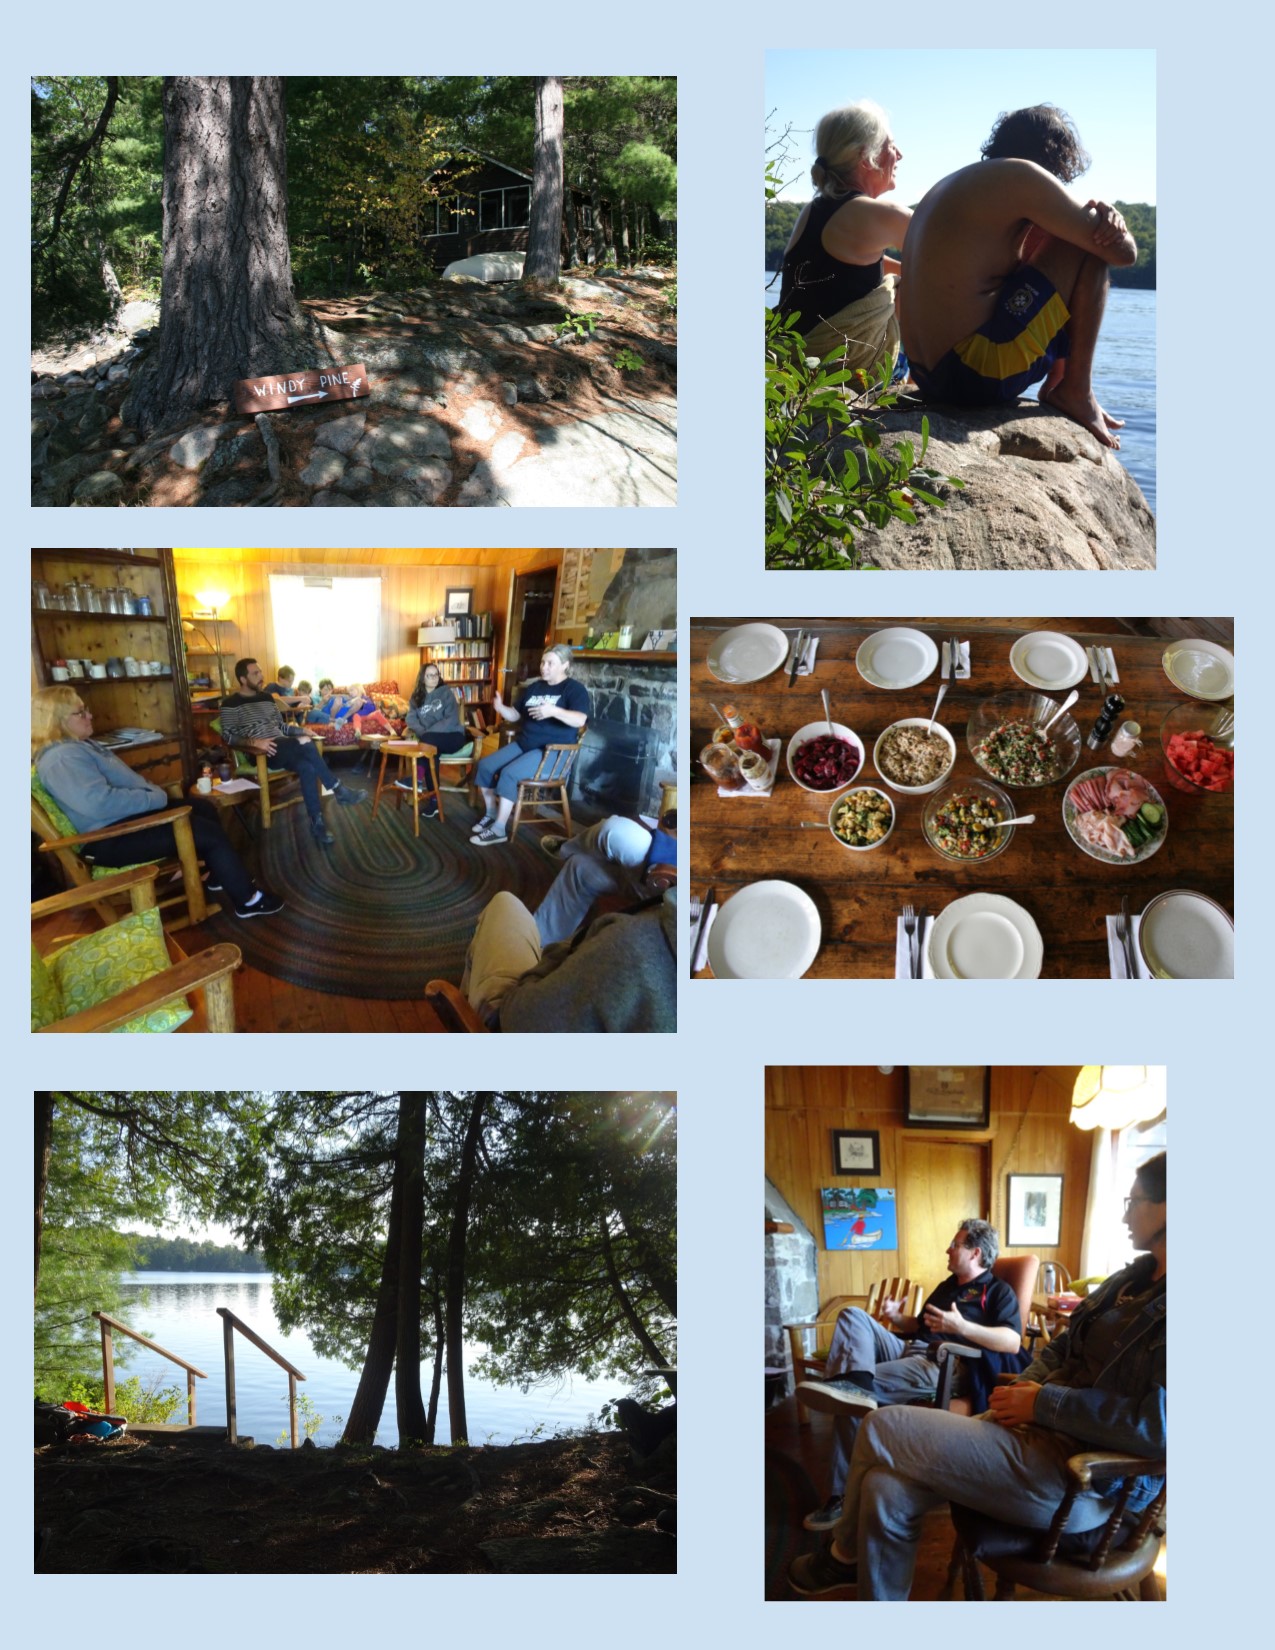 documents of food, people gathered, trees and water from 2018 retreat at Windy Pine